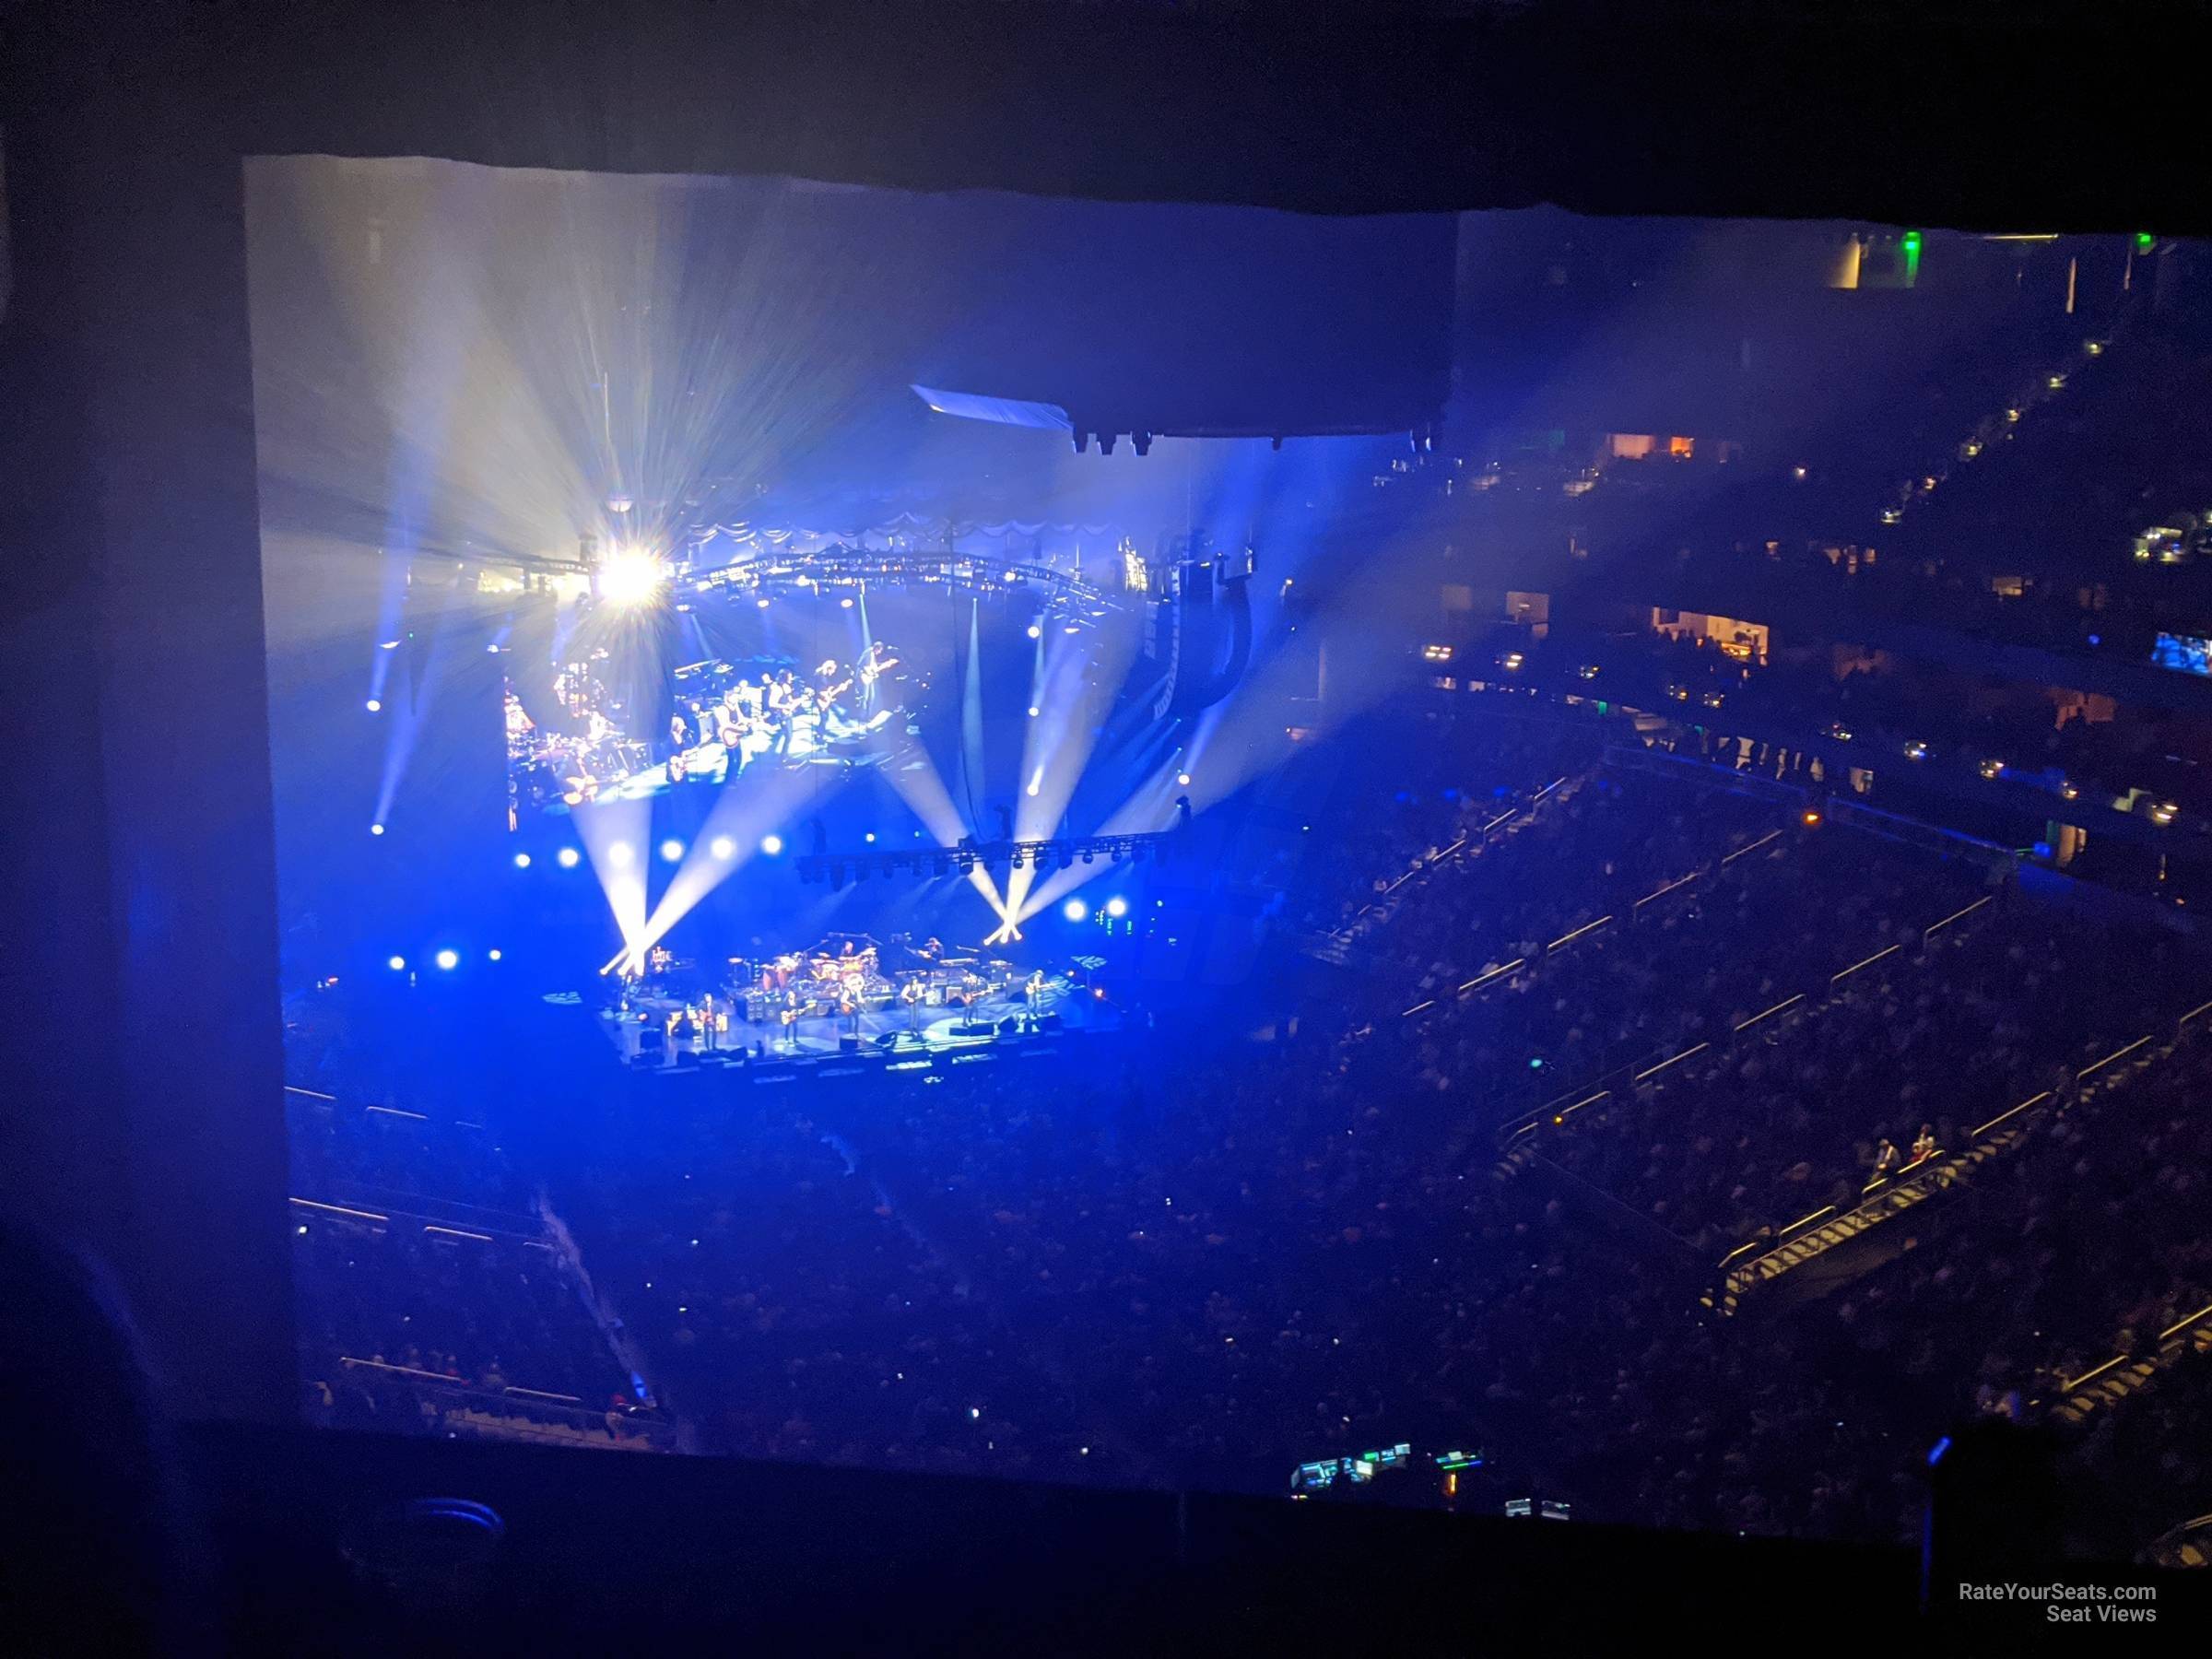 section 217, row p seat view  for concert - state farm arena